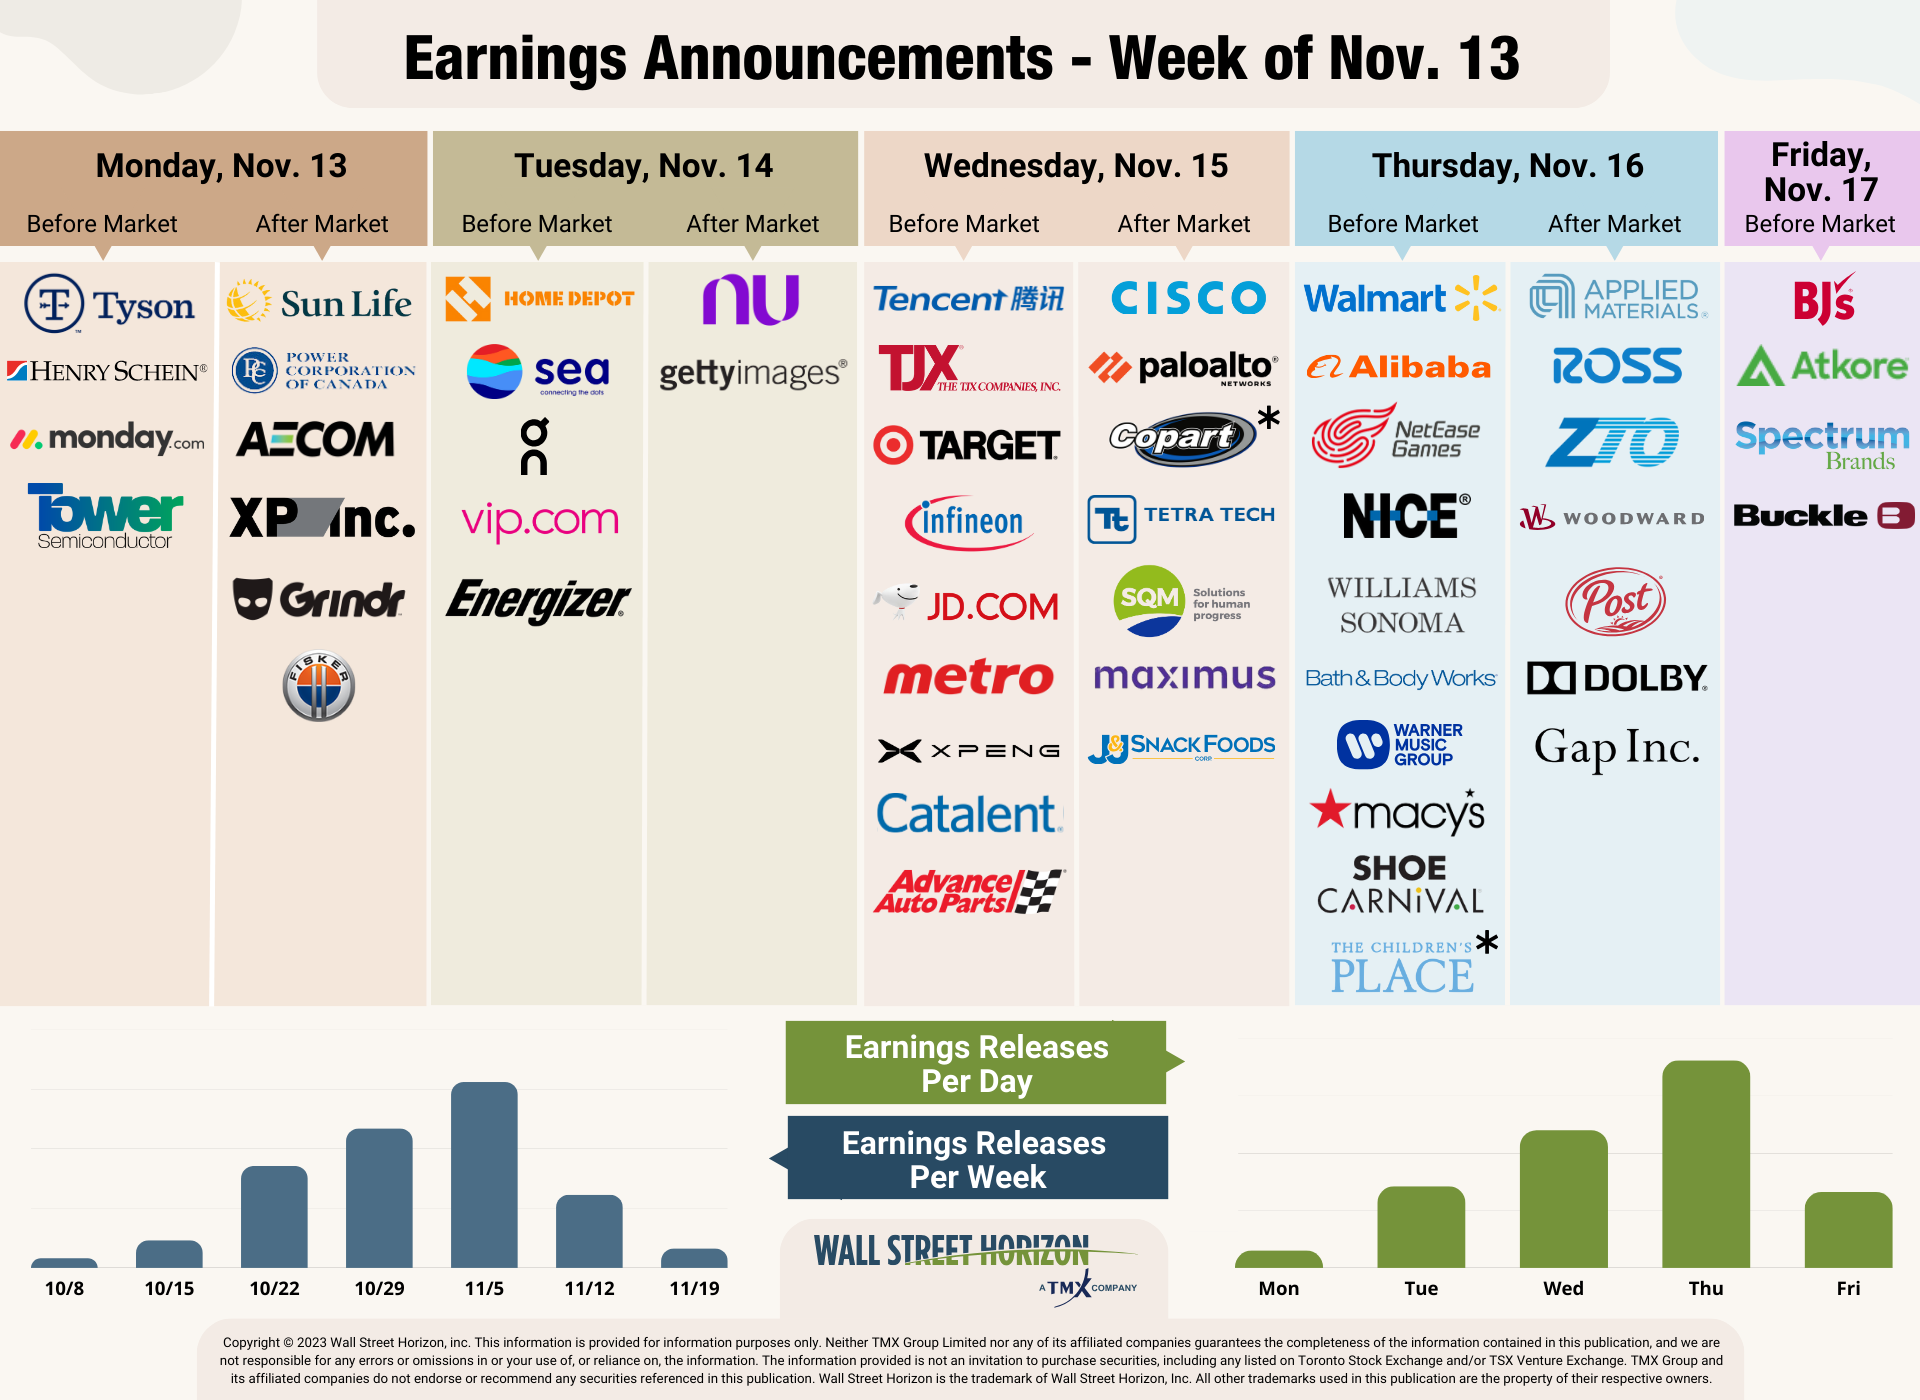 Earnings Announcements